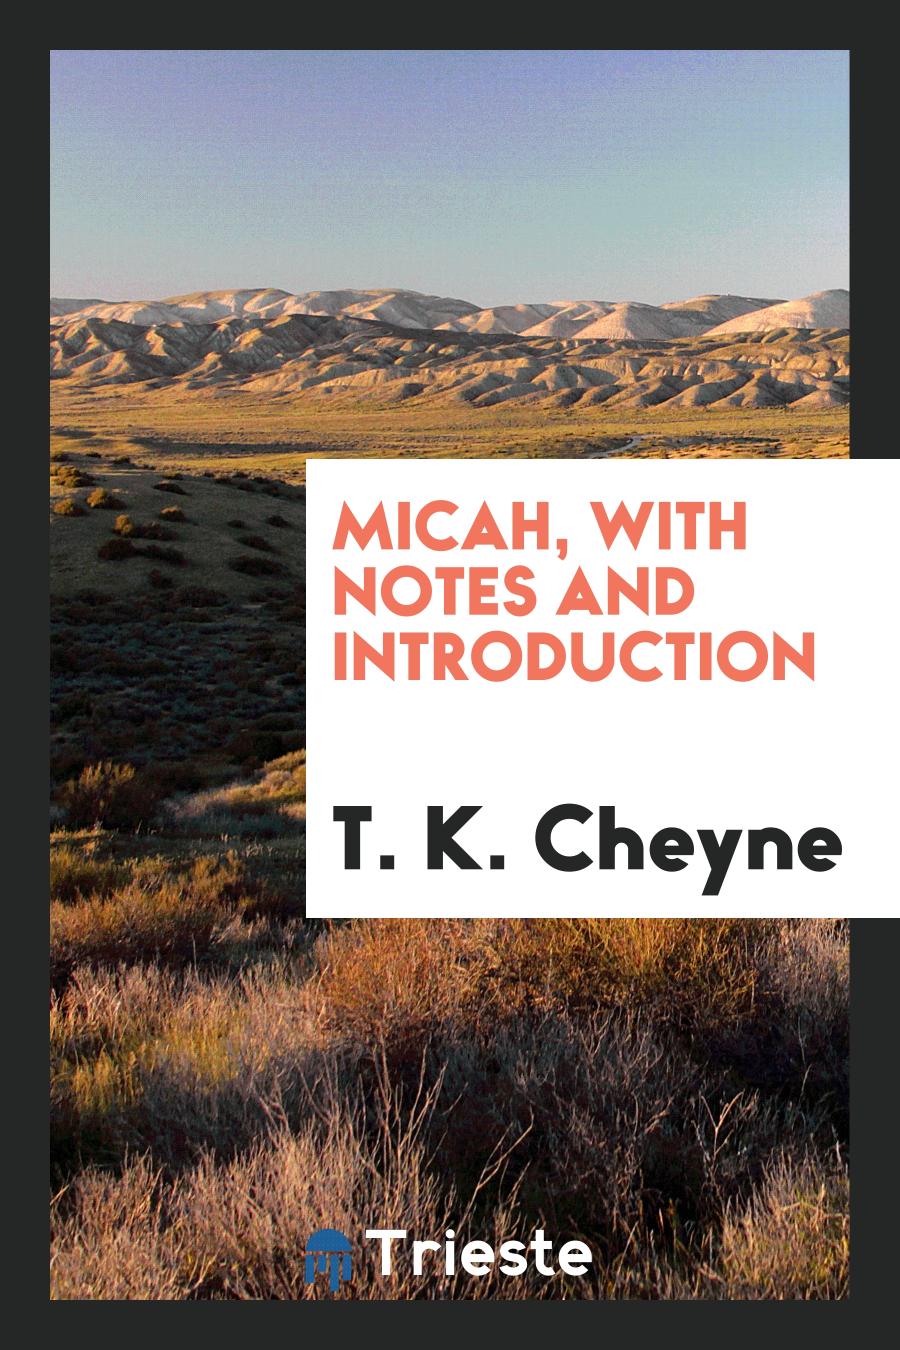 Micah, with Notes and Introduction